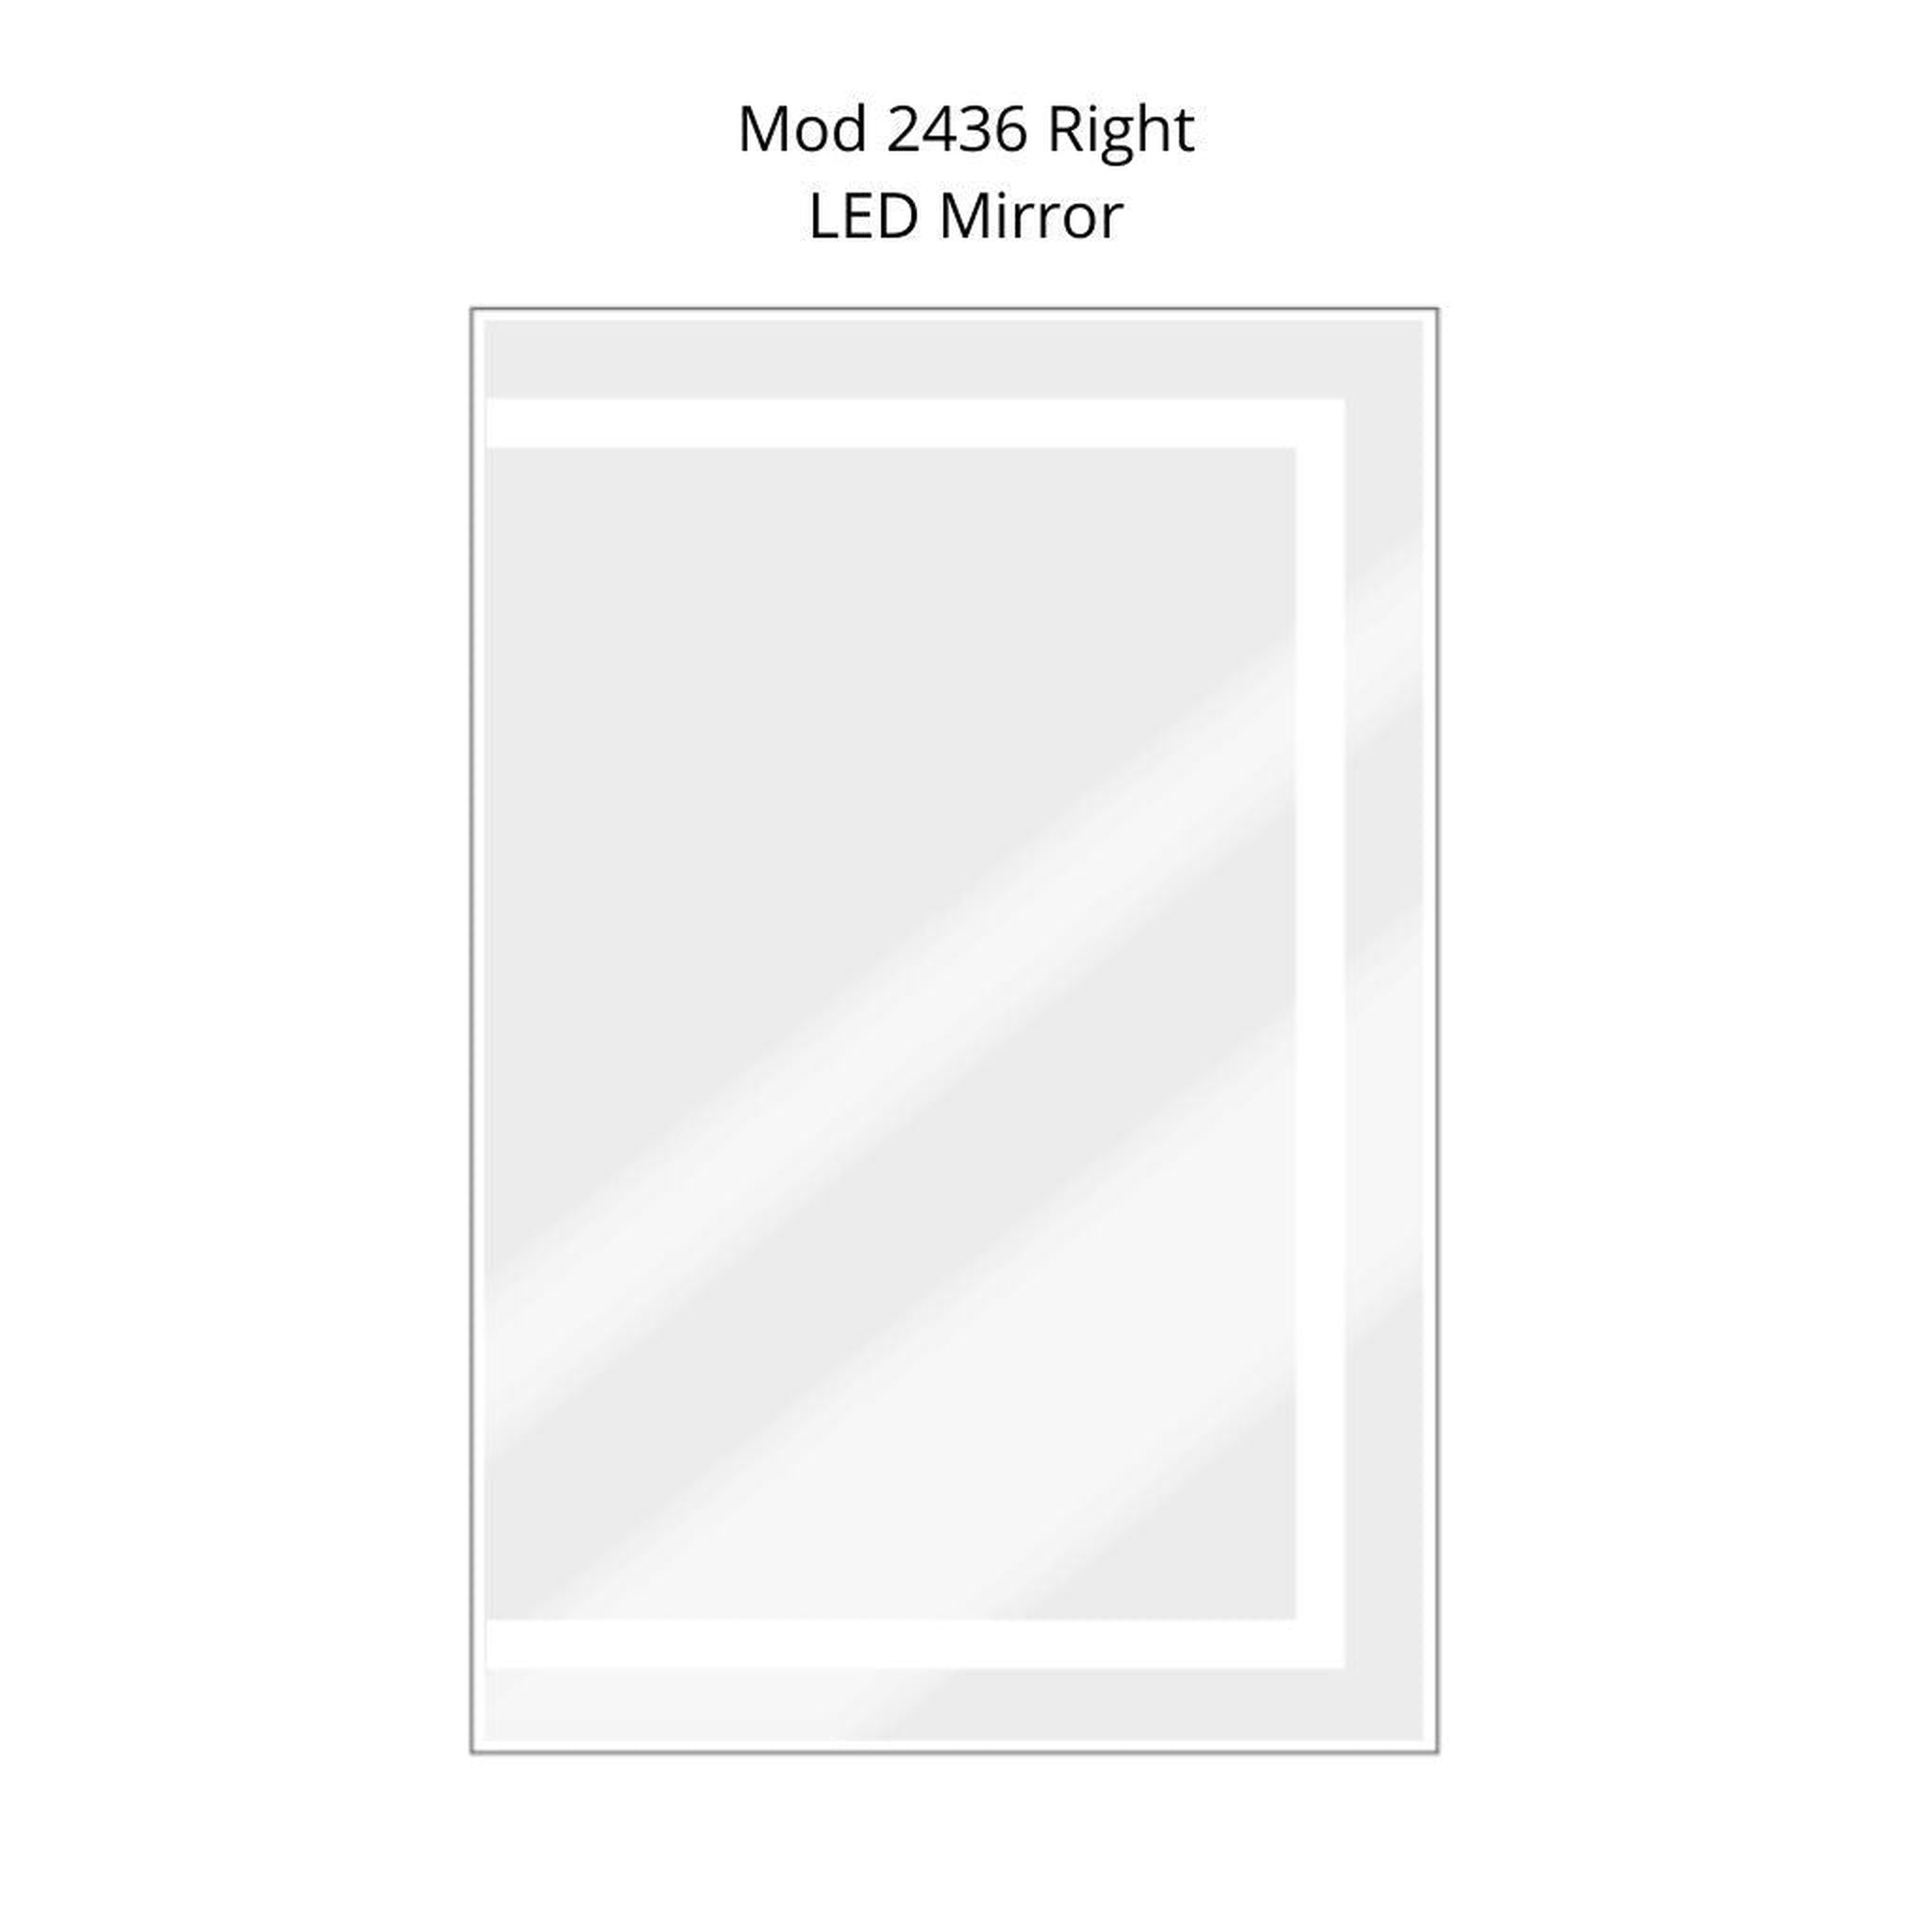 Krugg Reflections, Krugg Reflections Mod 24" x 36" 5000K Rectangular Right Configuration Wall-Mounted Silver-Backed LED Bathroom Vanity Mirror With Built-in Defogger and Dimmer